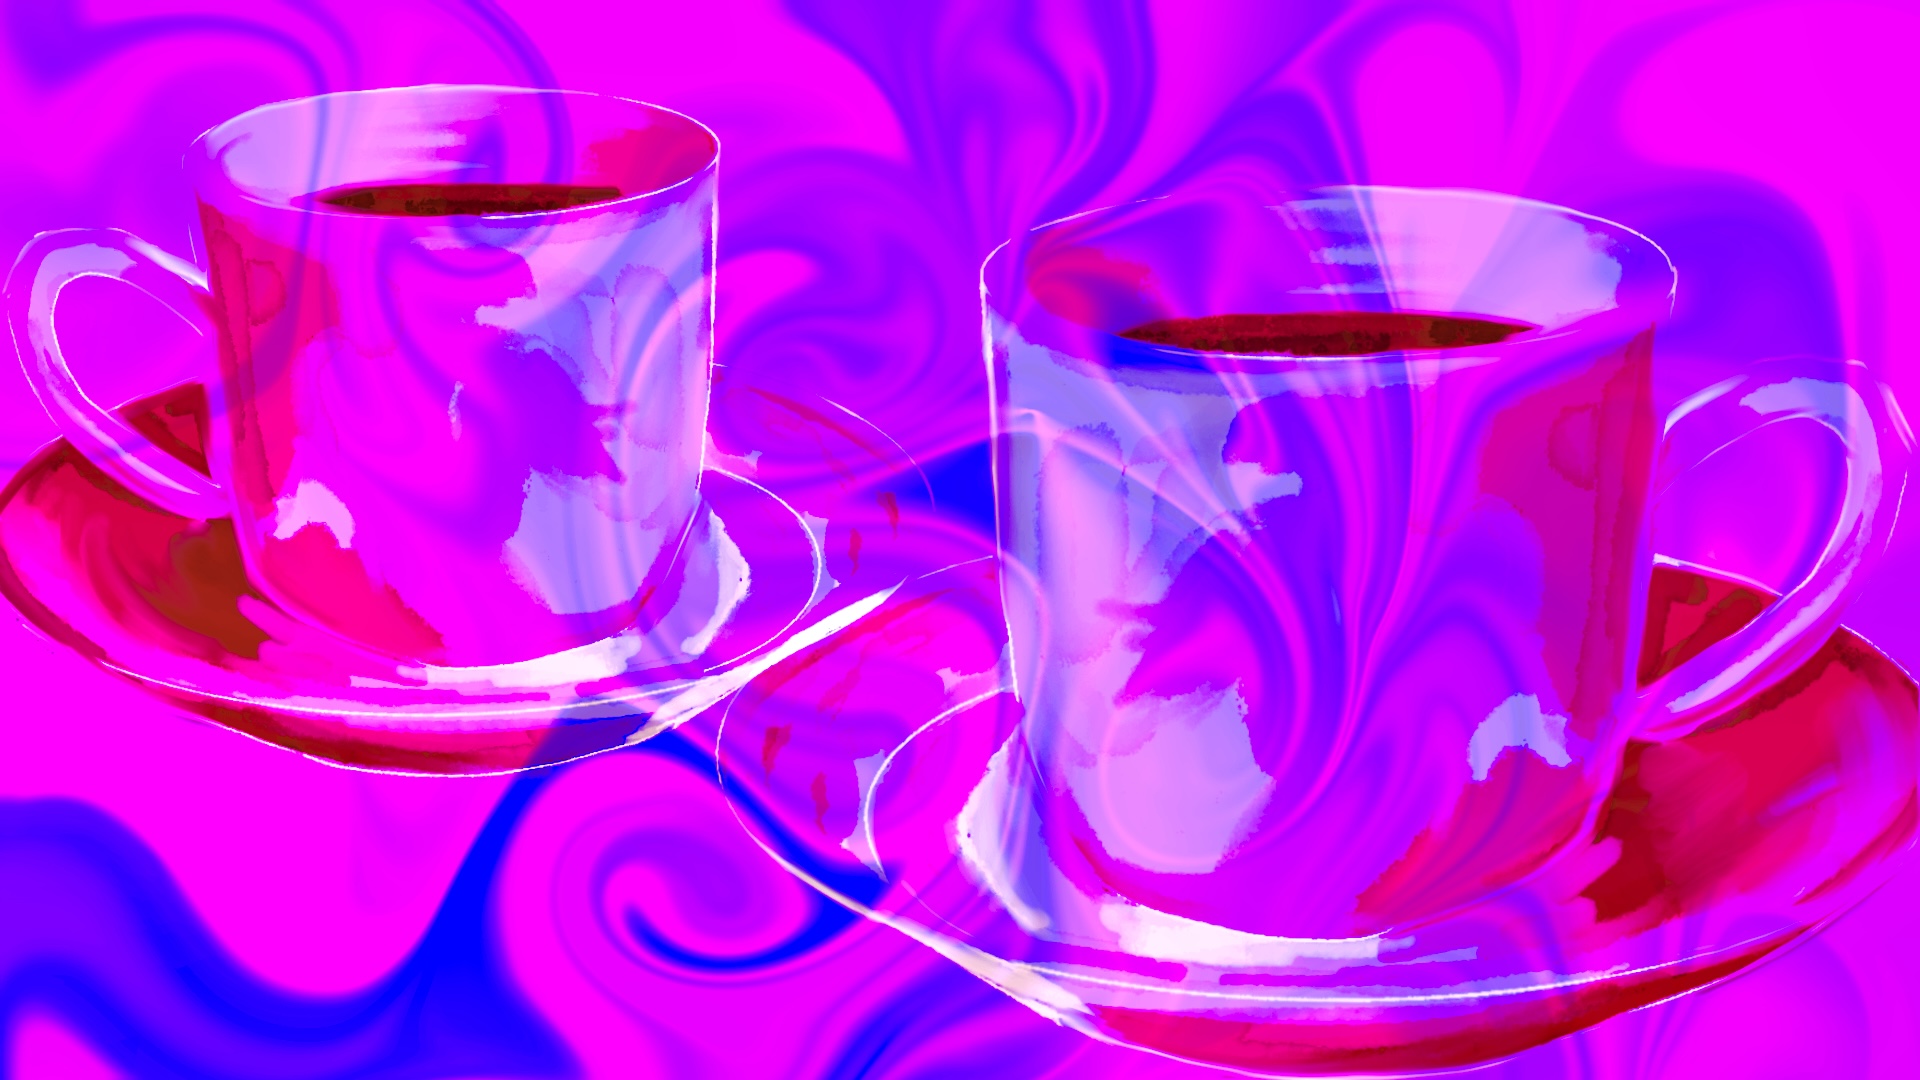 Abstract image of teacups